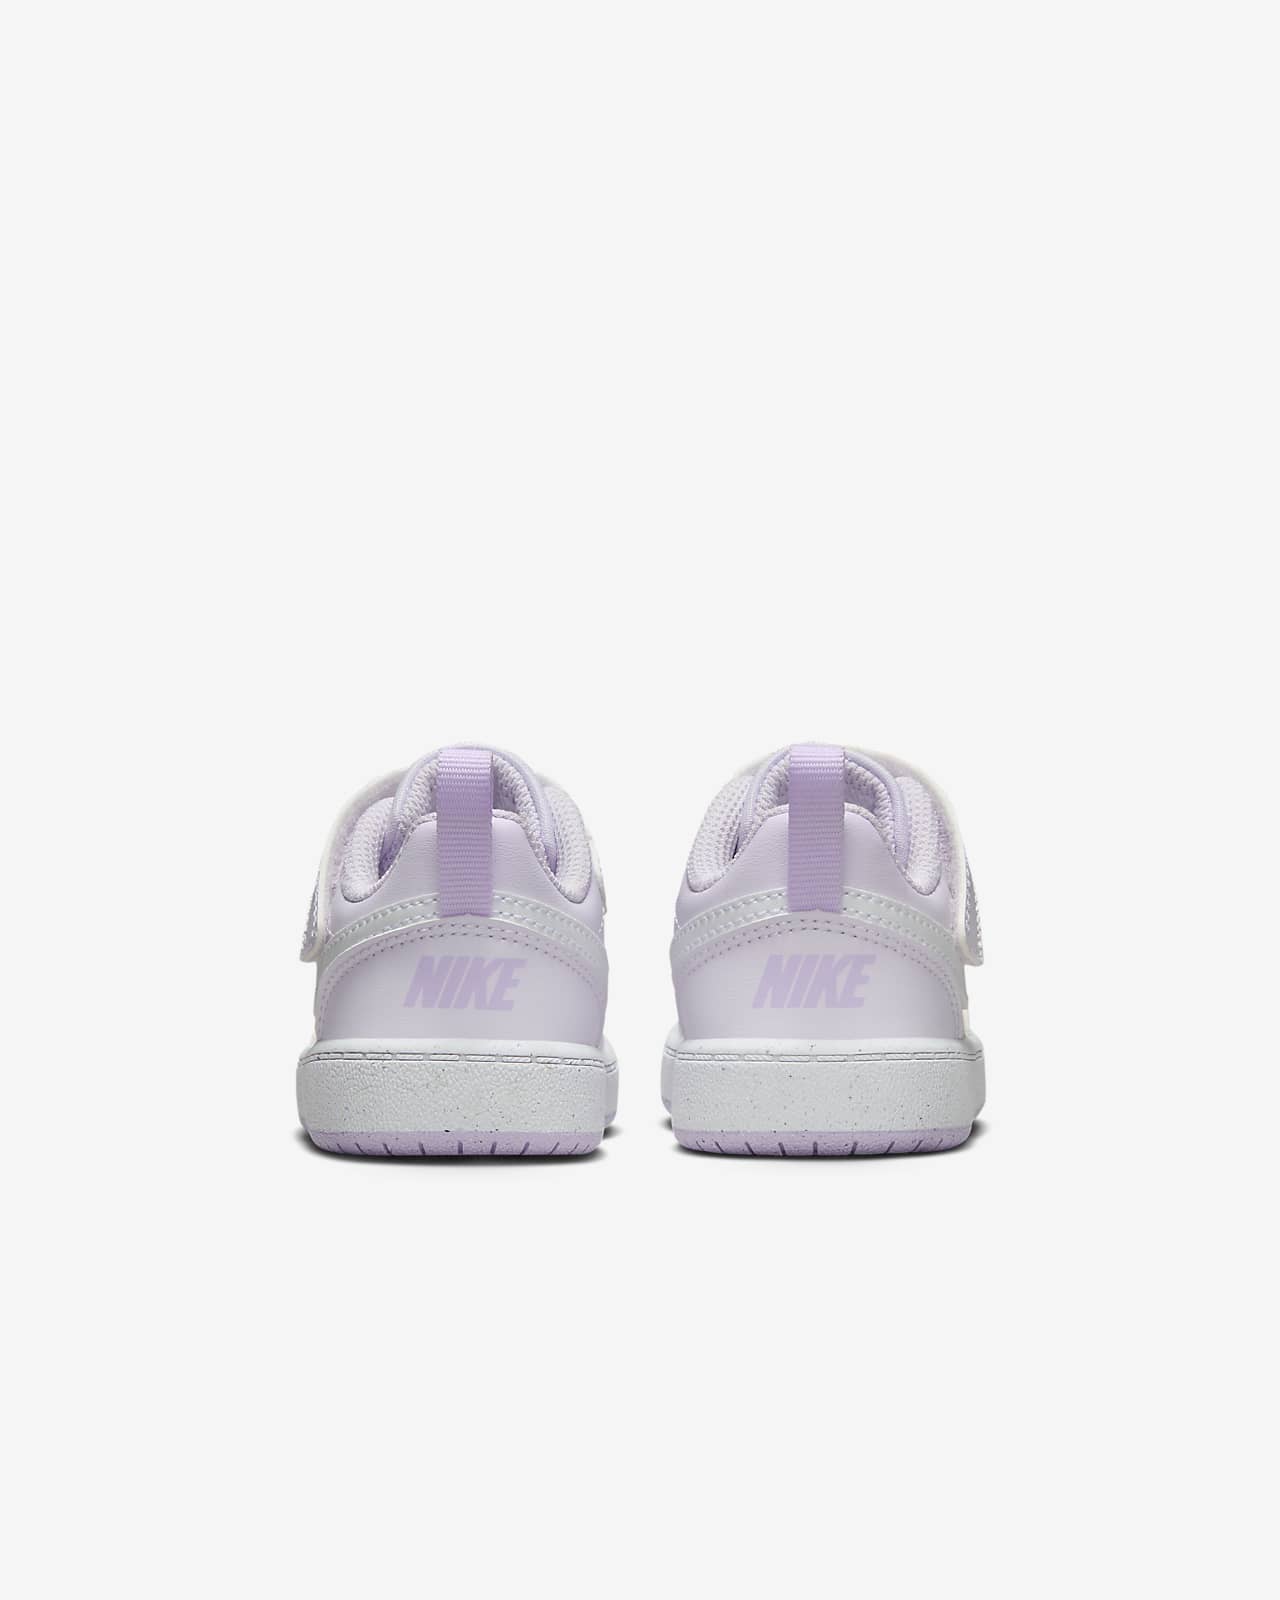 Nike Court Borough Low Recraft Baby/Toddler Shoes.